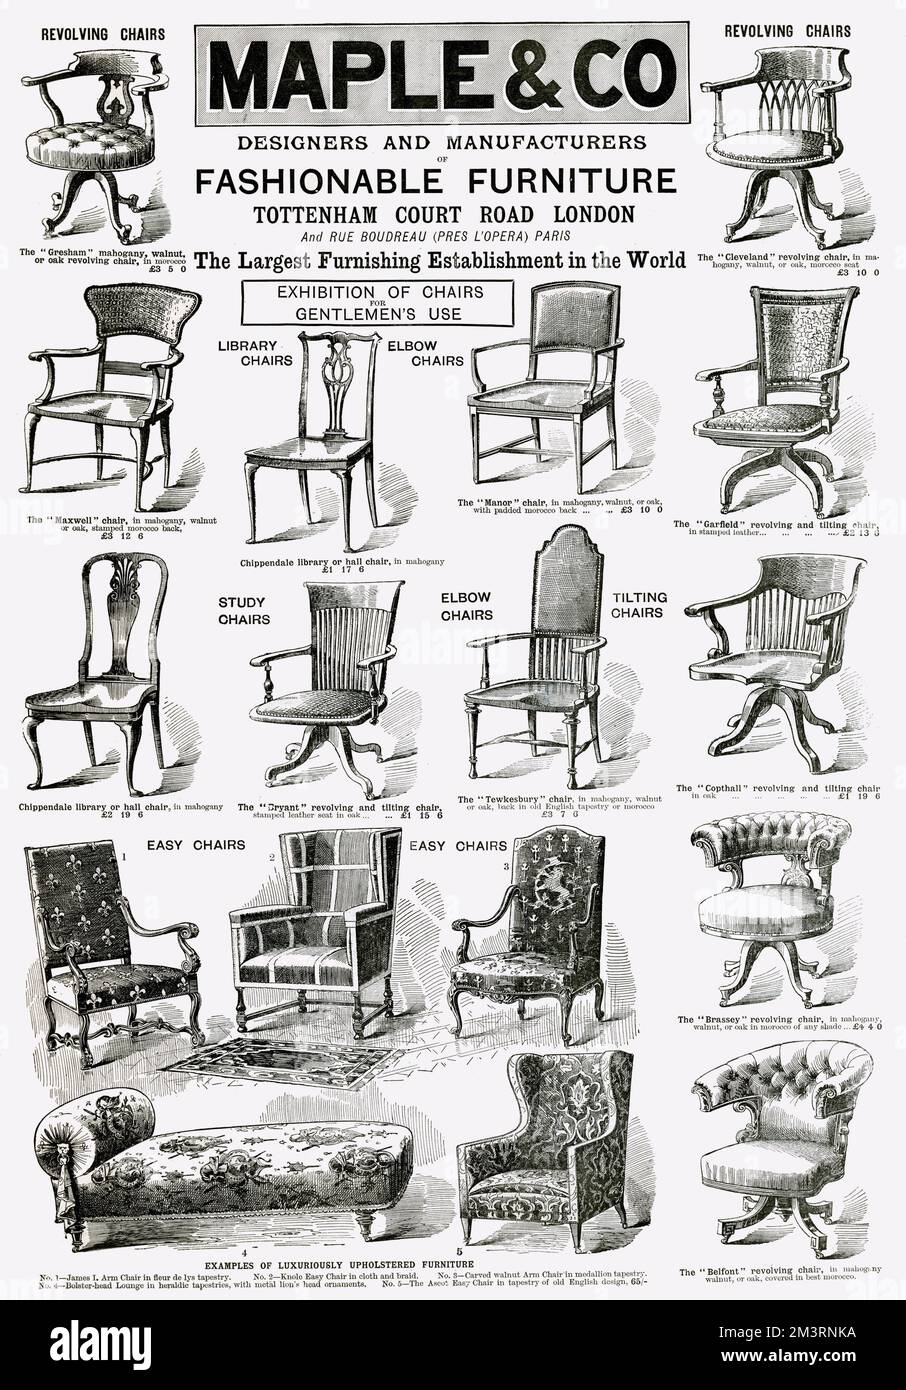 Large selection of wooden chairs available from 'Maple &amp; Co', in Tottenham Court Road, London.   1900 Stock Photo